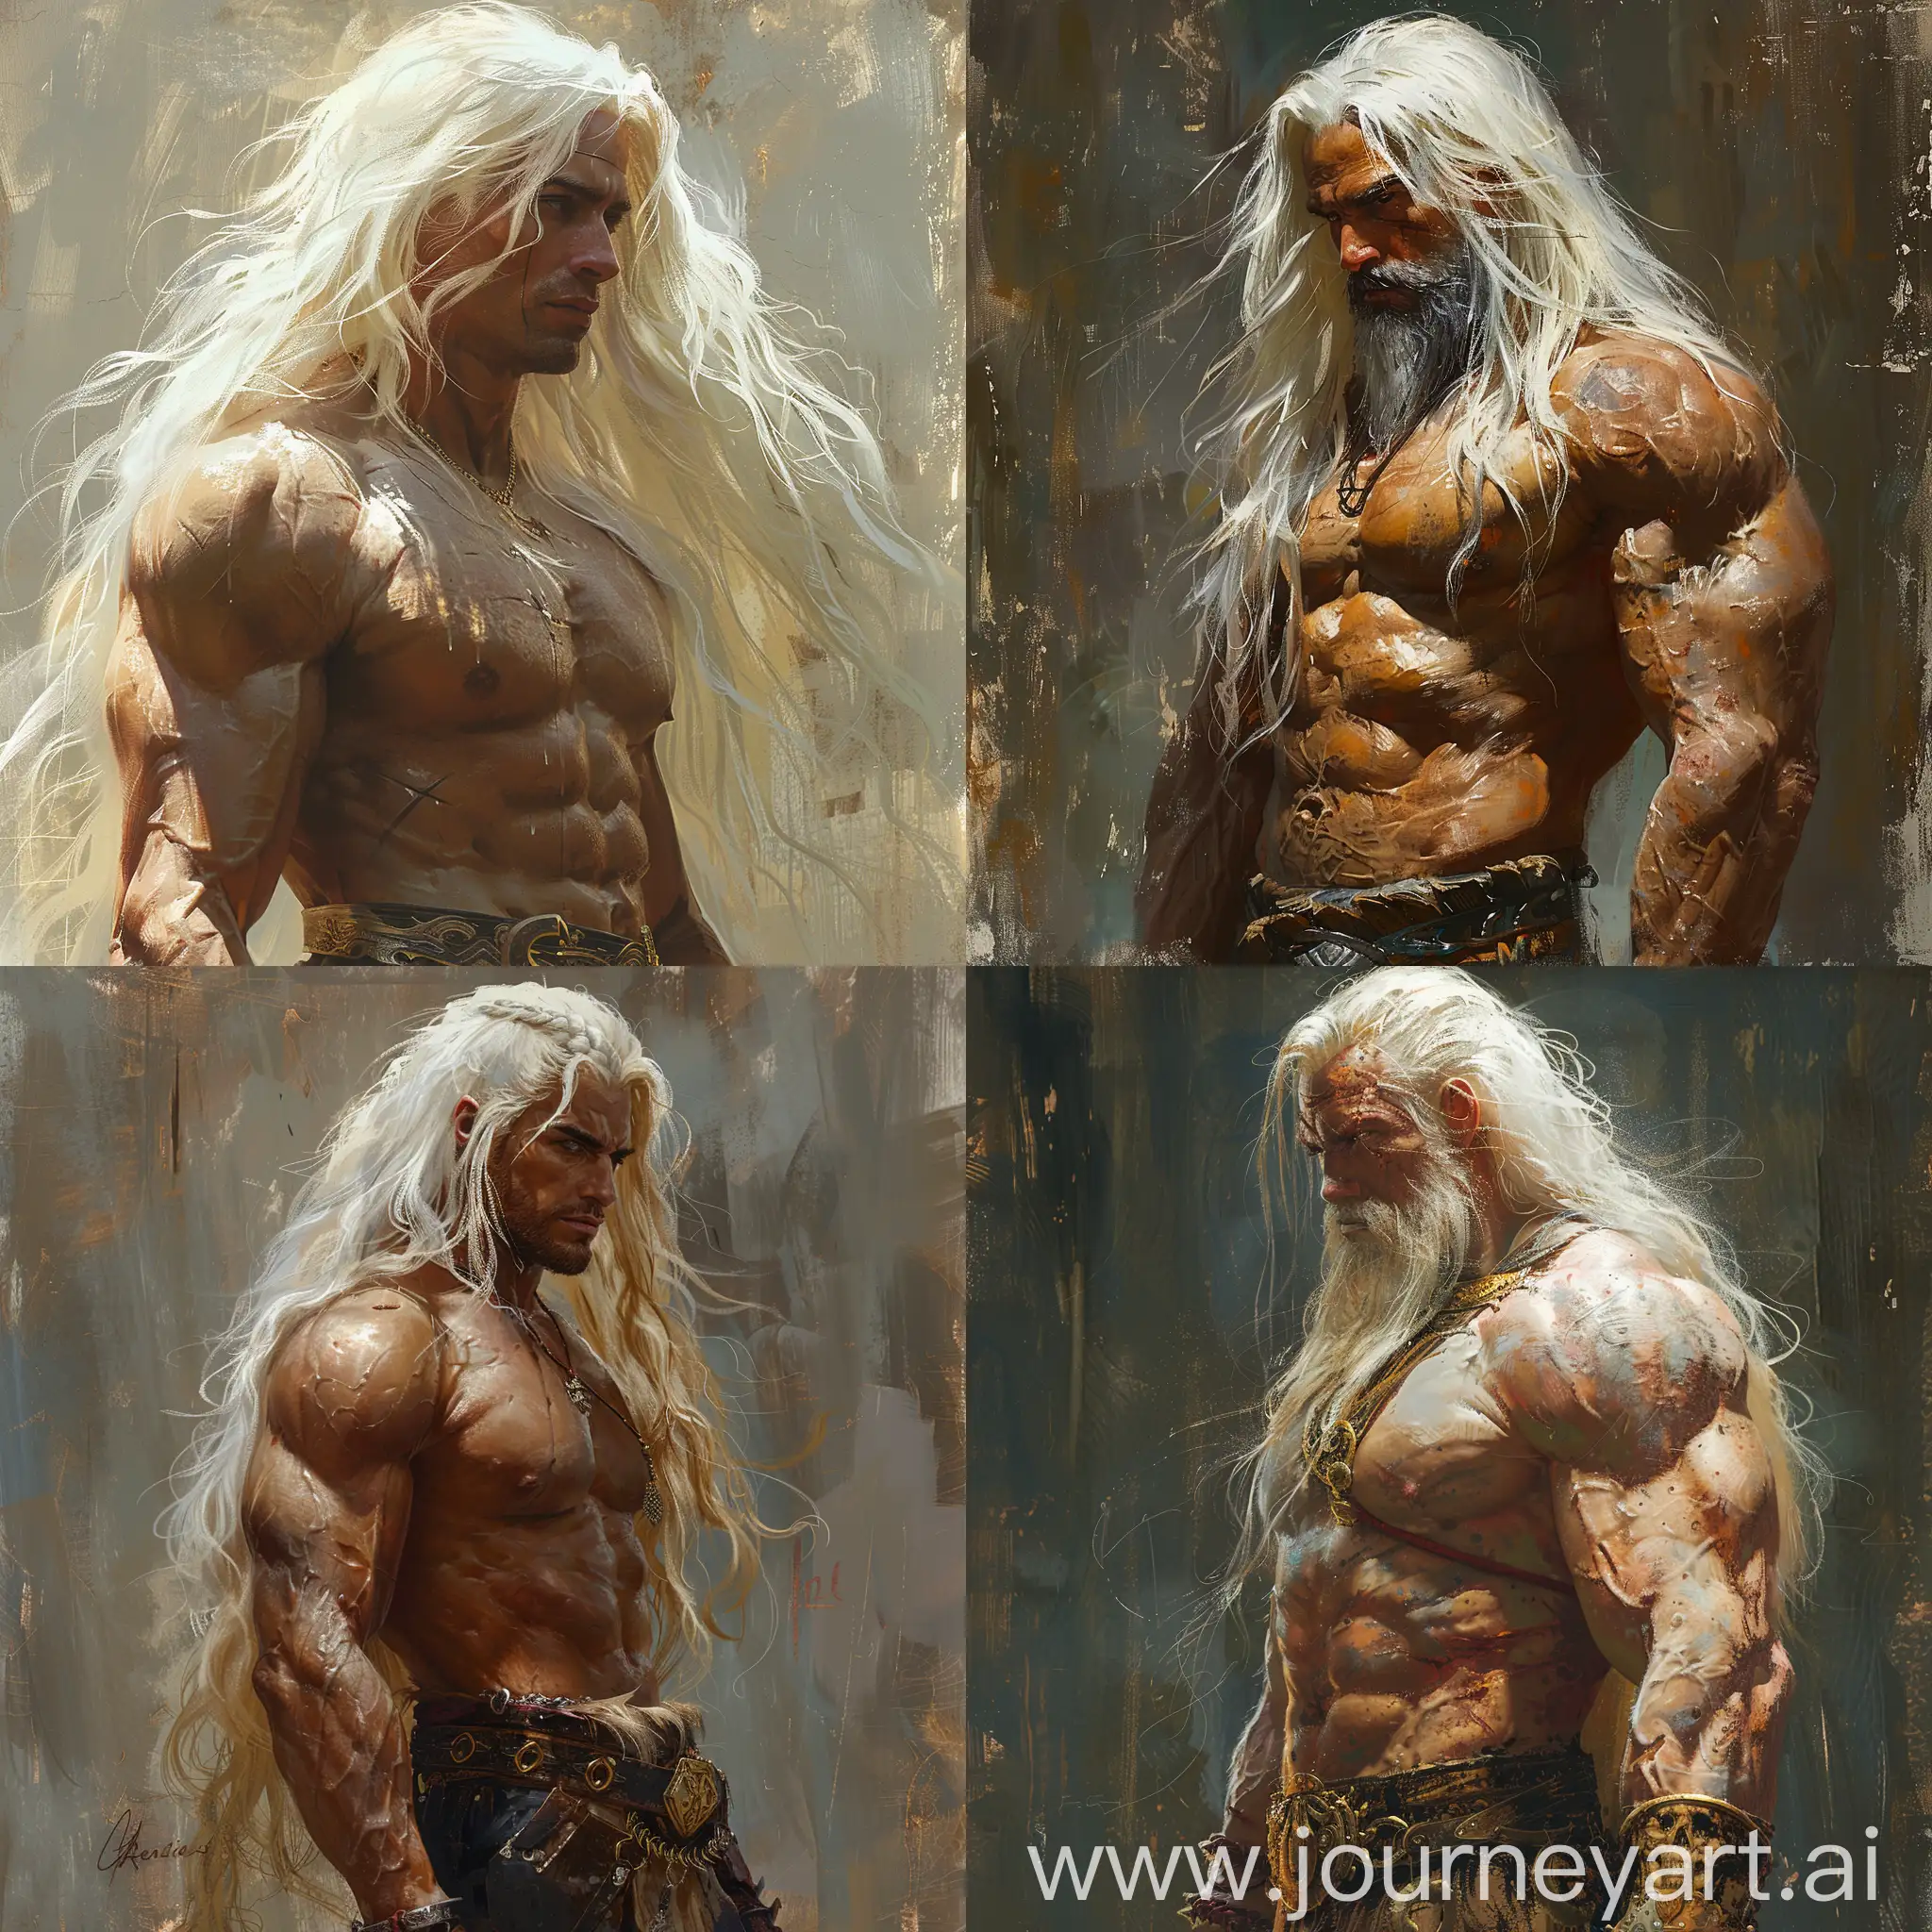 Subject: a Warrior of Warrior s; skin Purer than gold, long white hair, muscular, emanates power that can rewrite infinities. Style/coloring: extremely realistic painted realism, detailed digital painting concept art, detailed painting by Gaston Bussière, Craig Mullins. A mystical, dreamlike portrait in a cinematic style, Ed Emsh, Virgil Finlay, Norman Saunders, Hubert Rogers, Earle Bergey, Kelly Freas --upbeta --s 250 --v 6 --